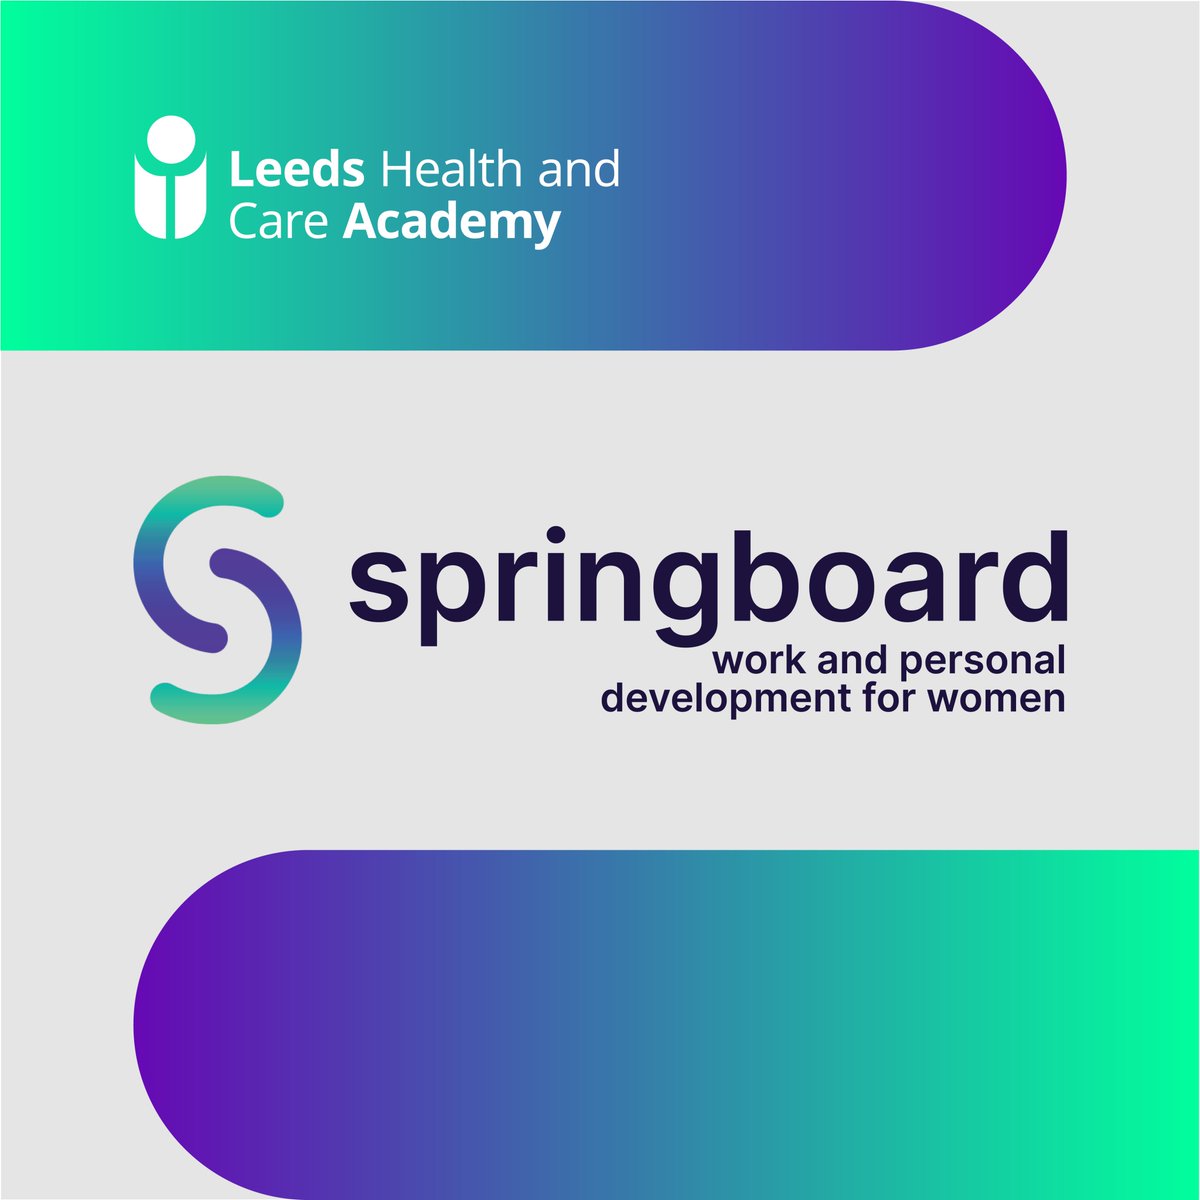 Spaces are available for the Springboard cohorts starting in September! Springboard provides a space for self-reflection, and is designed to empower participants with self-belief and positive thinking. Find out more and enrol on the programme here: leedshealthandcareacademy.org/learning/syste…